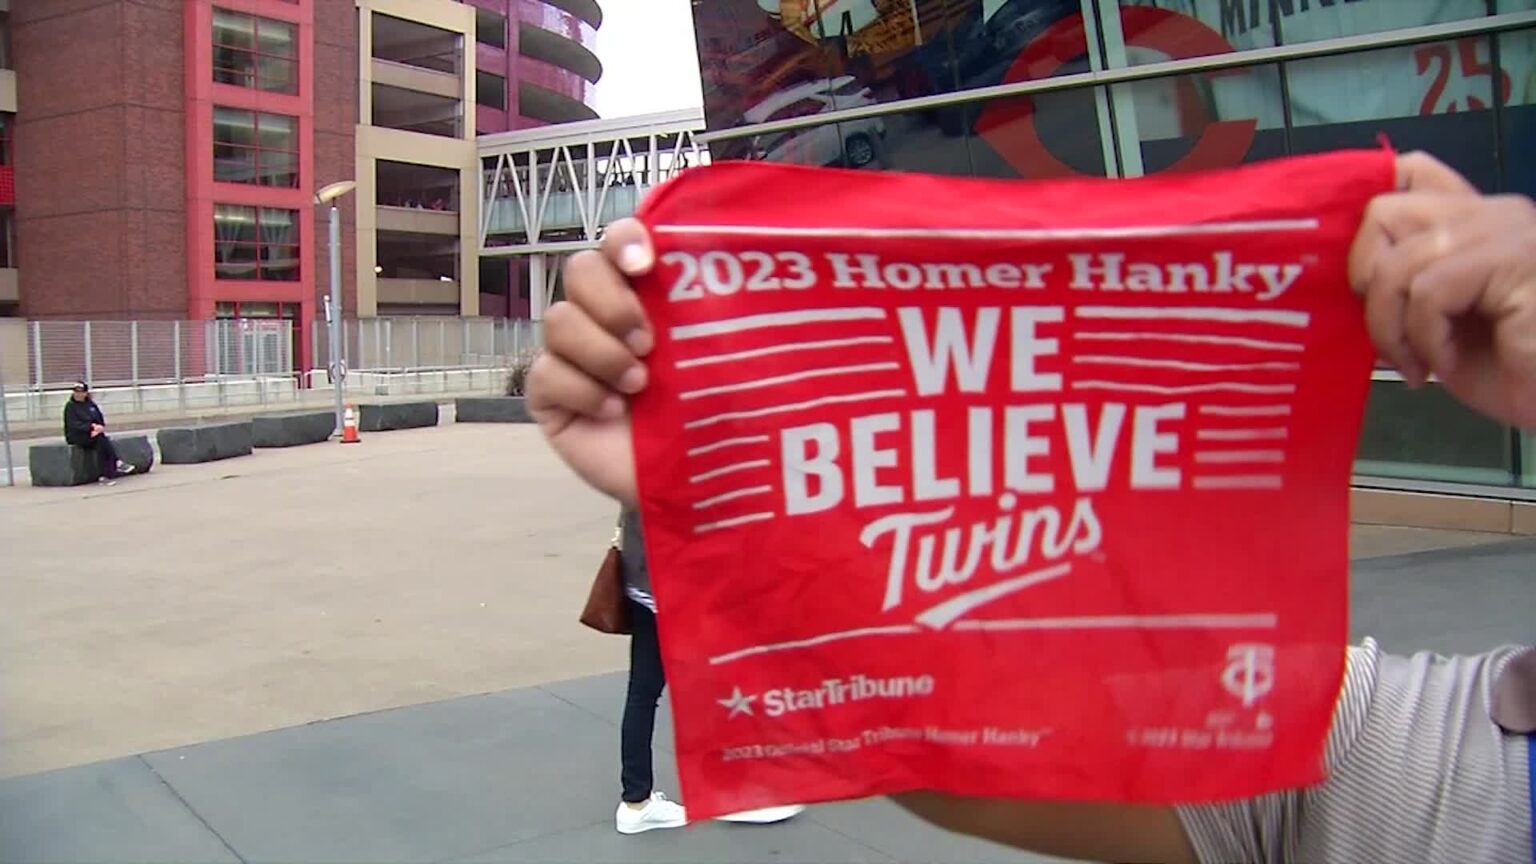 Minnesota Twins unveil 2023 Homer Hanky after clinching AL Central